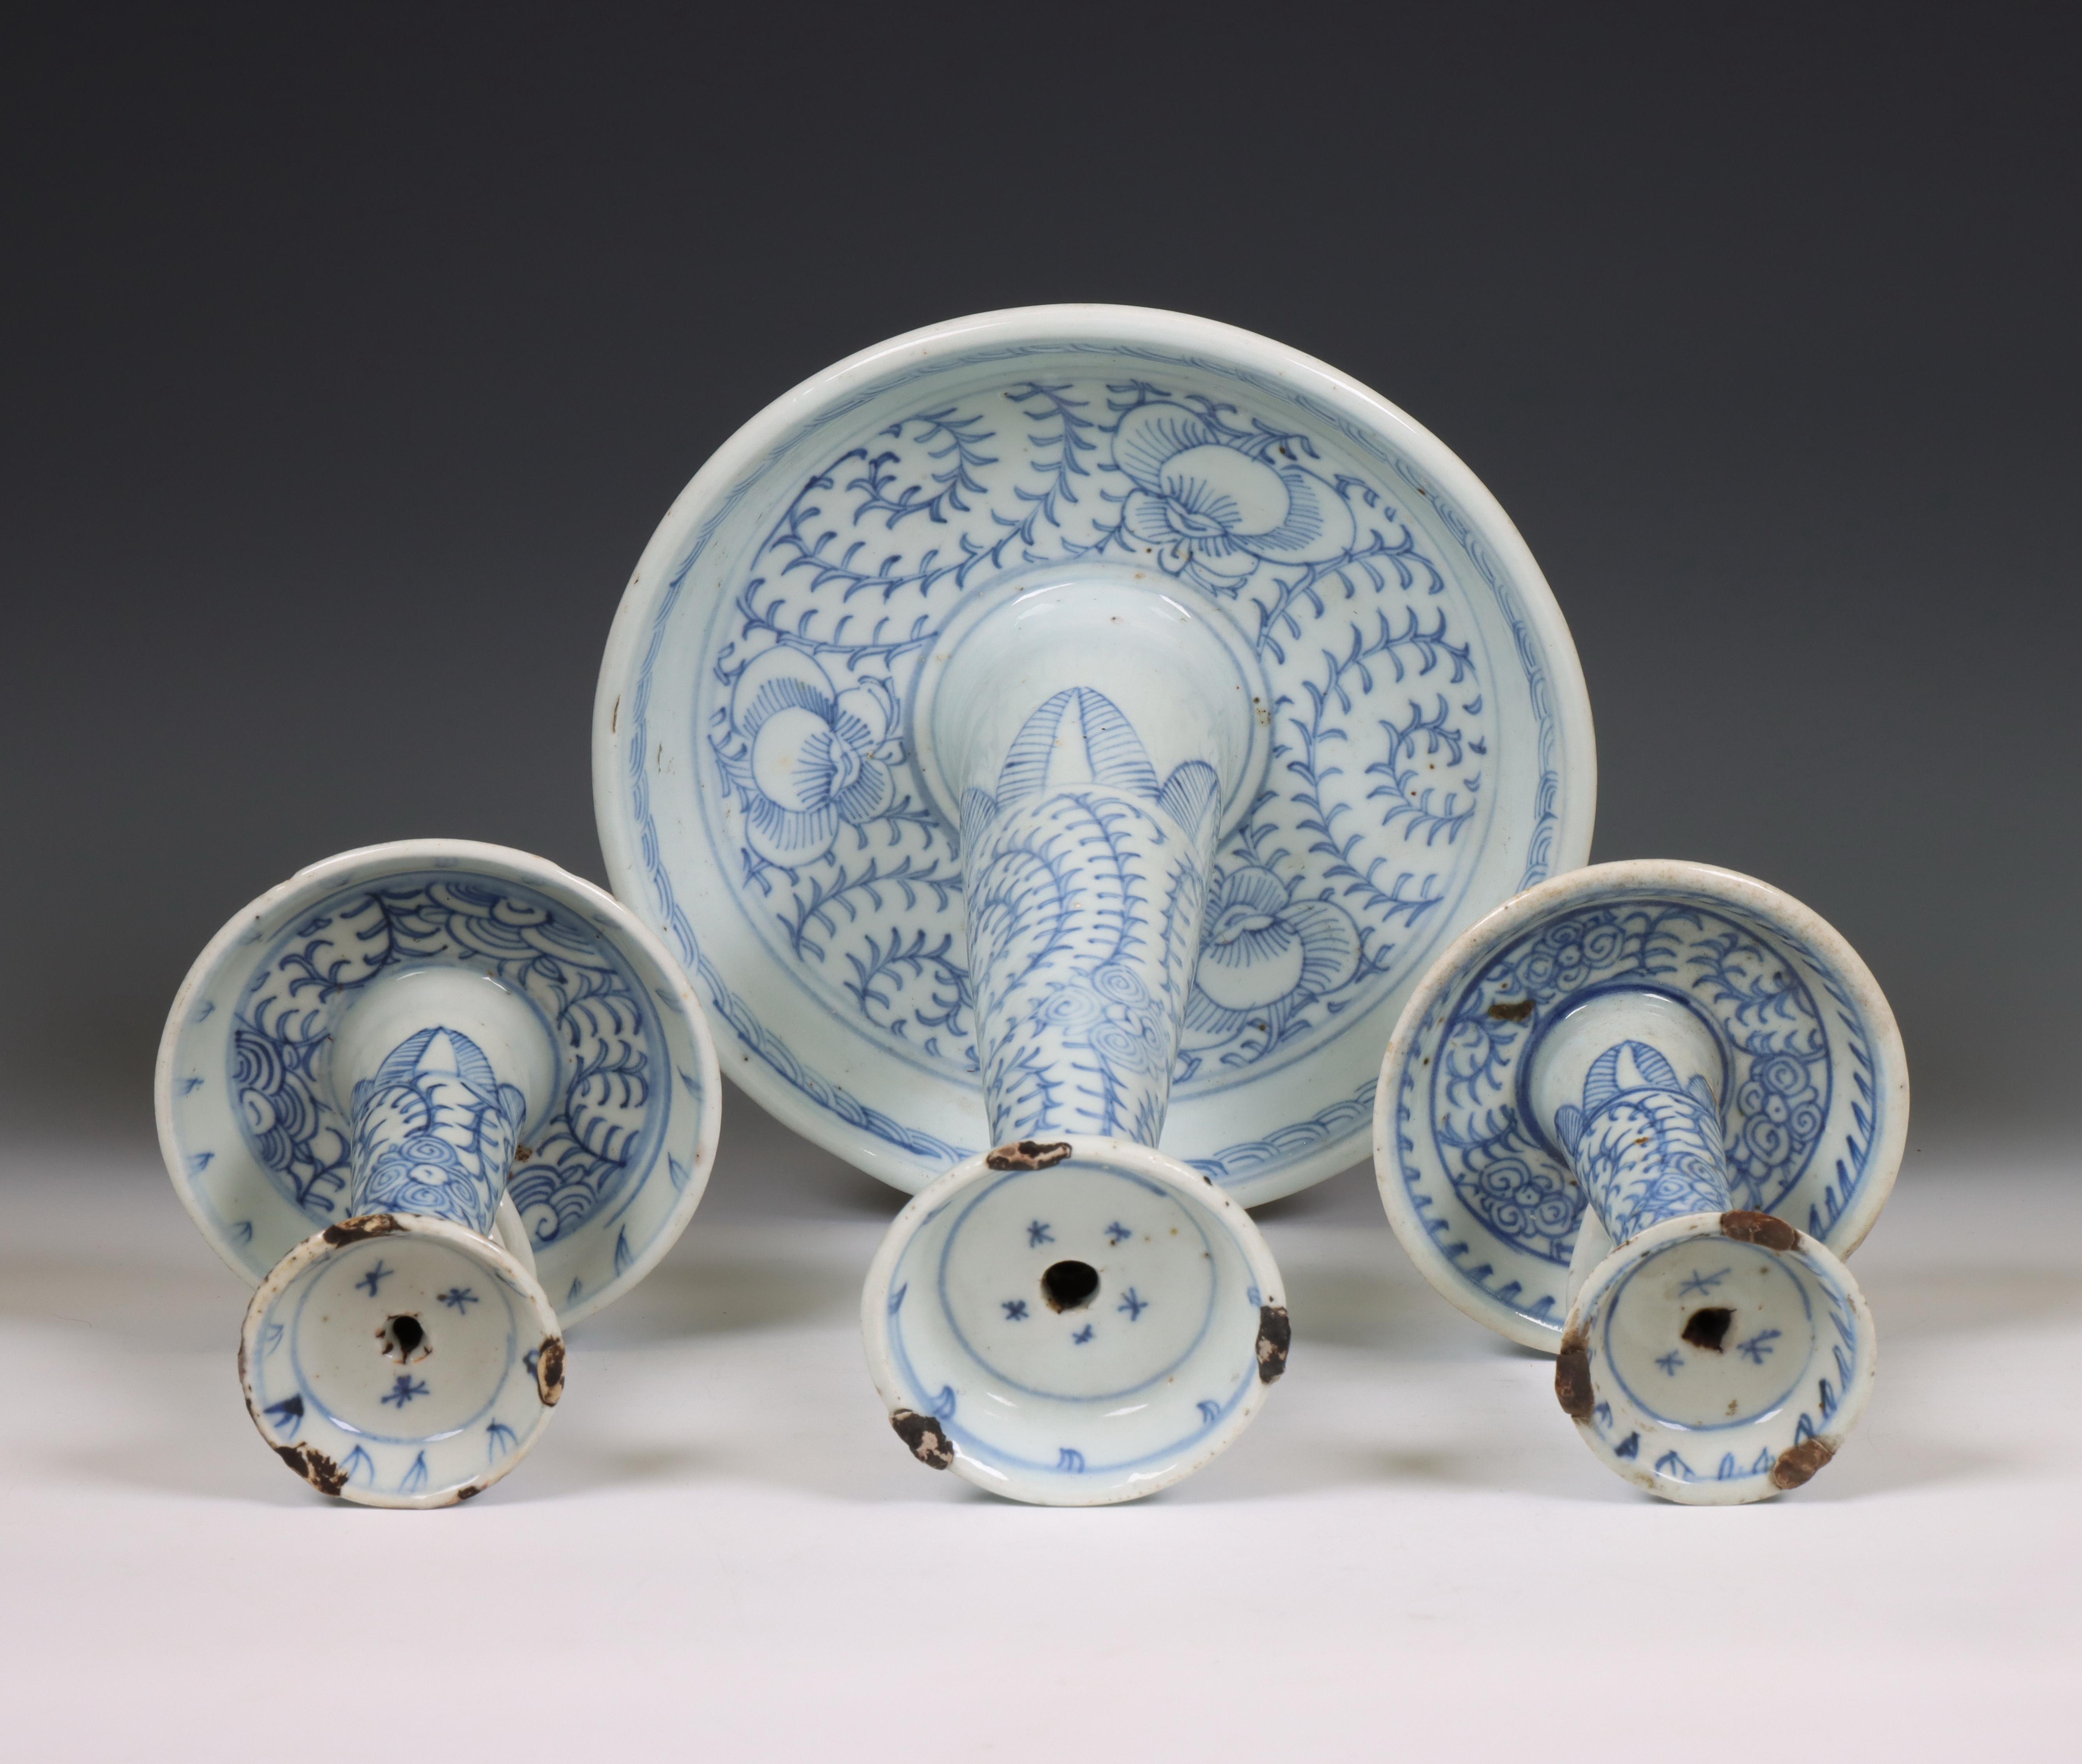 China, three blue and white porcelain candlesticks, 20th century, - Image 2 of 2